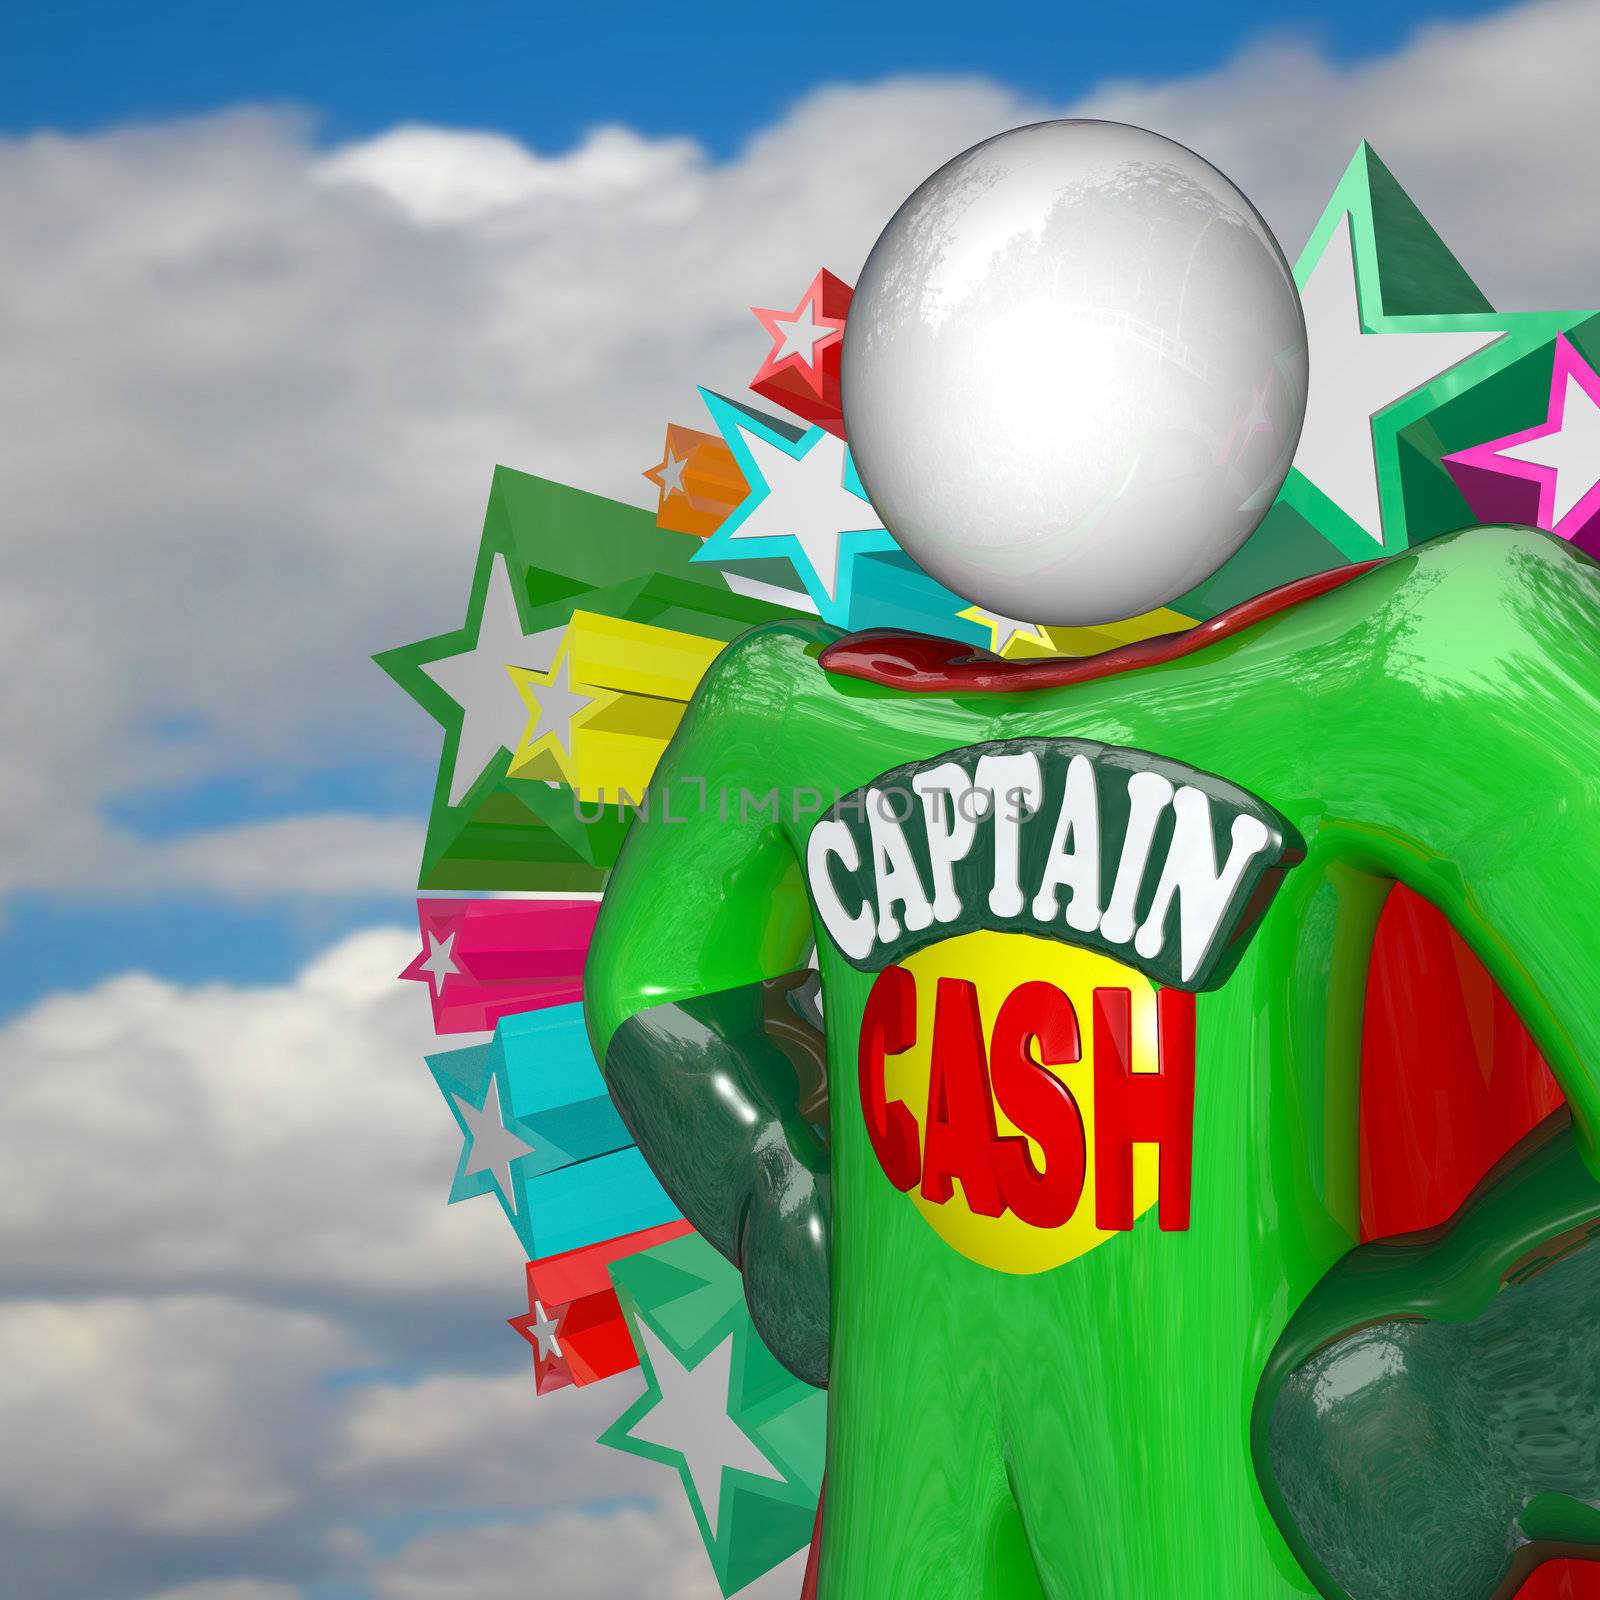 Captain Cash Super Hero Fights for Lower Prices to Save Money by iQoncept